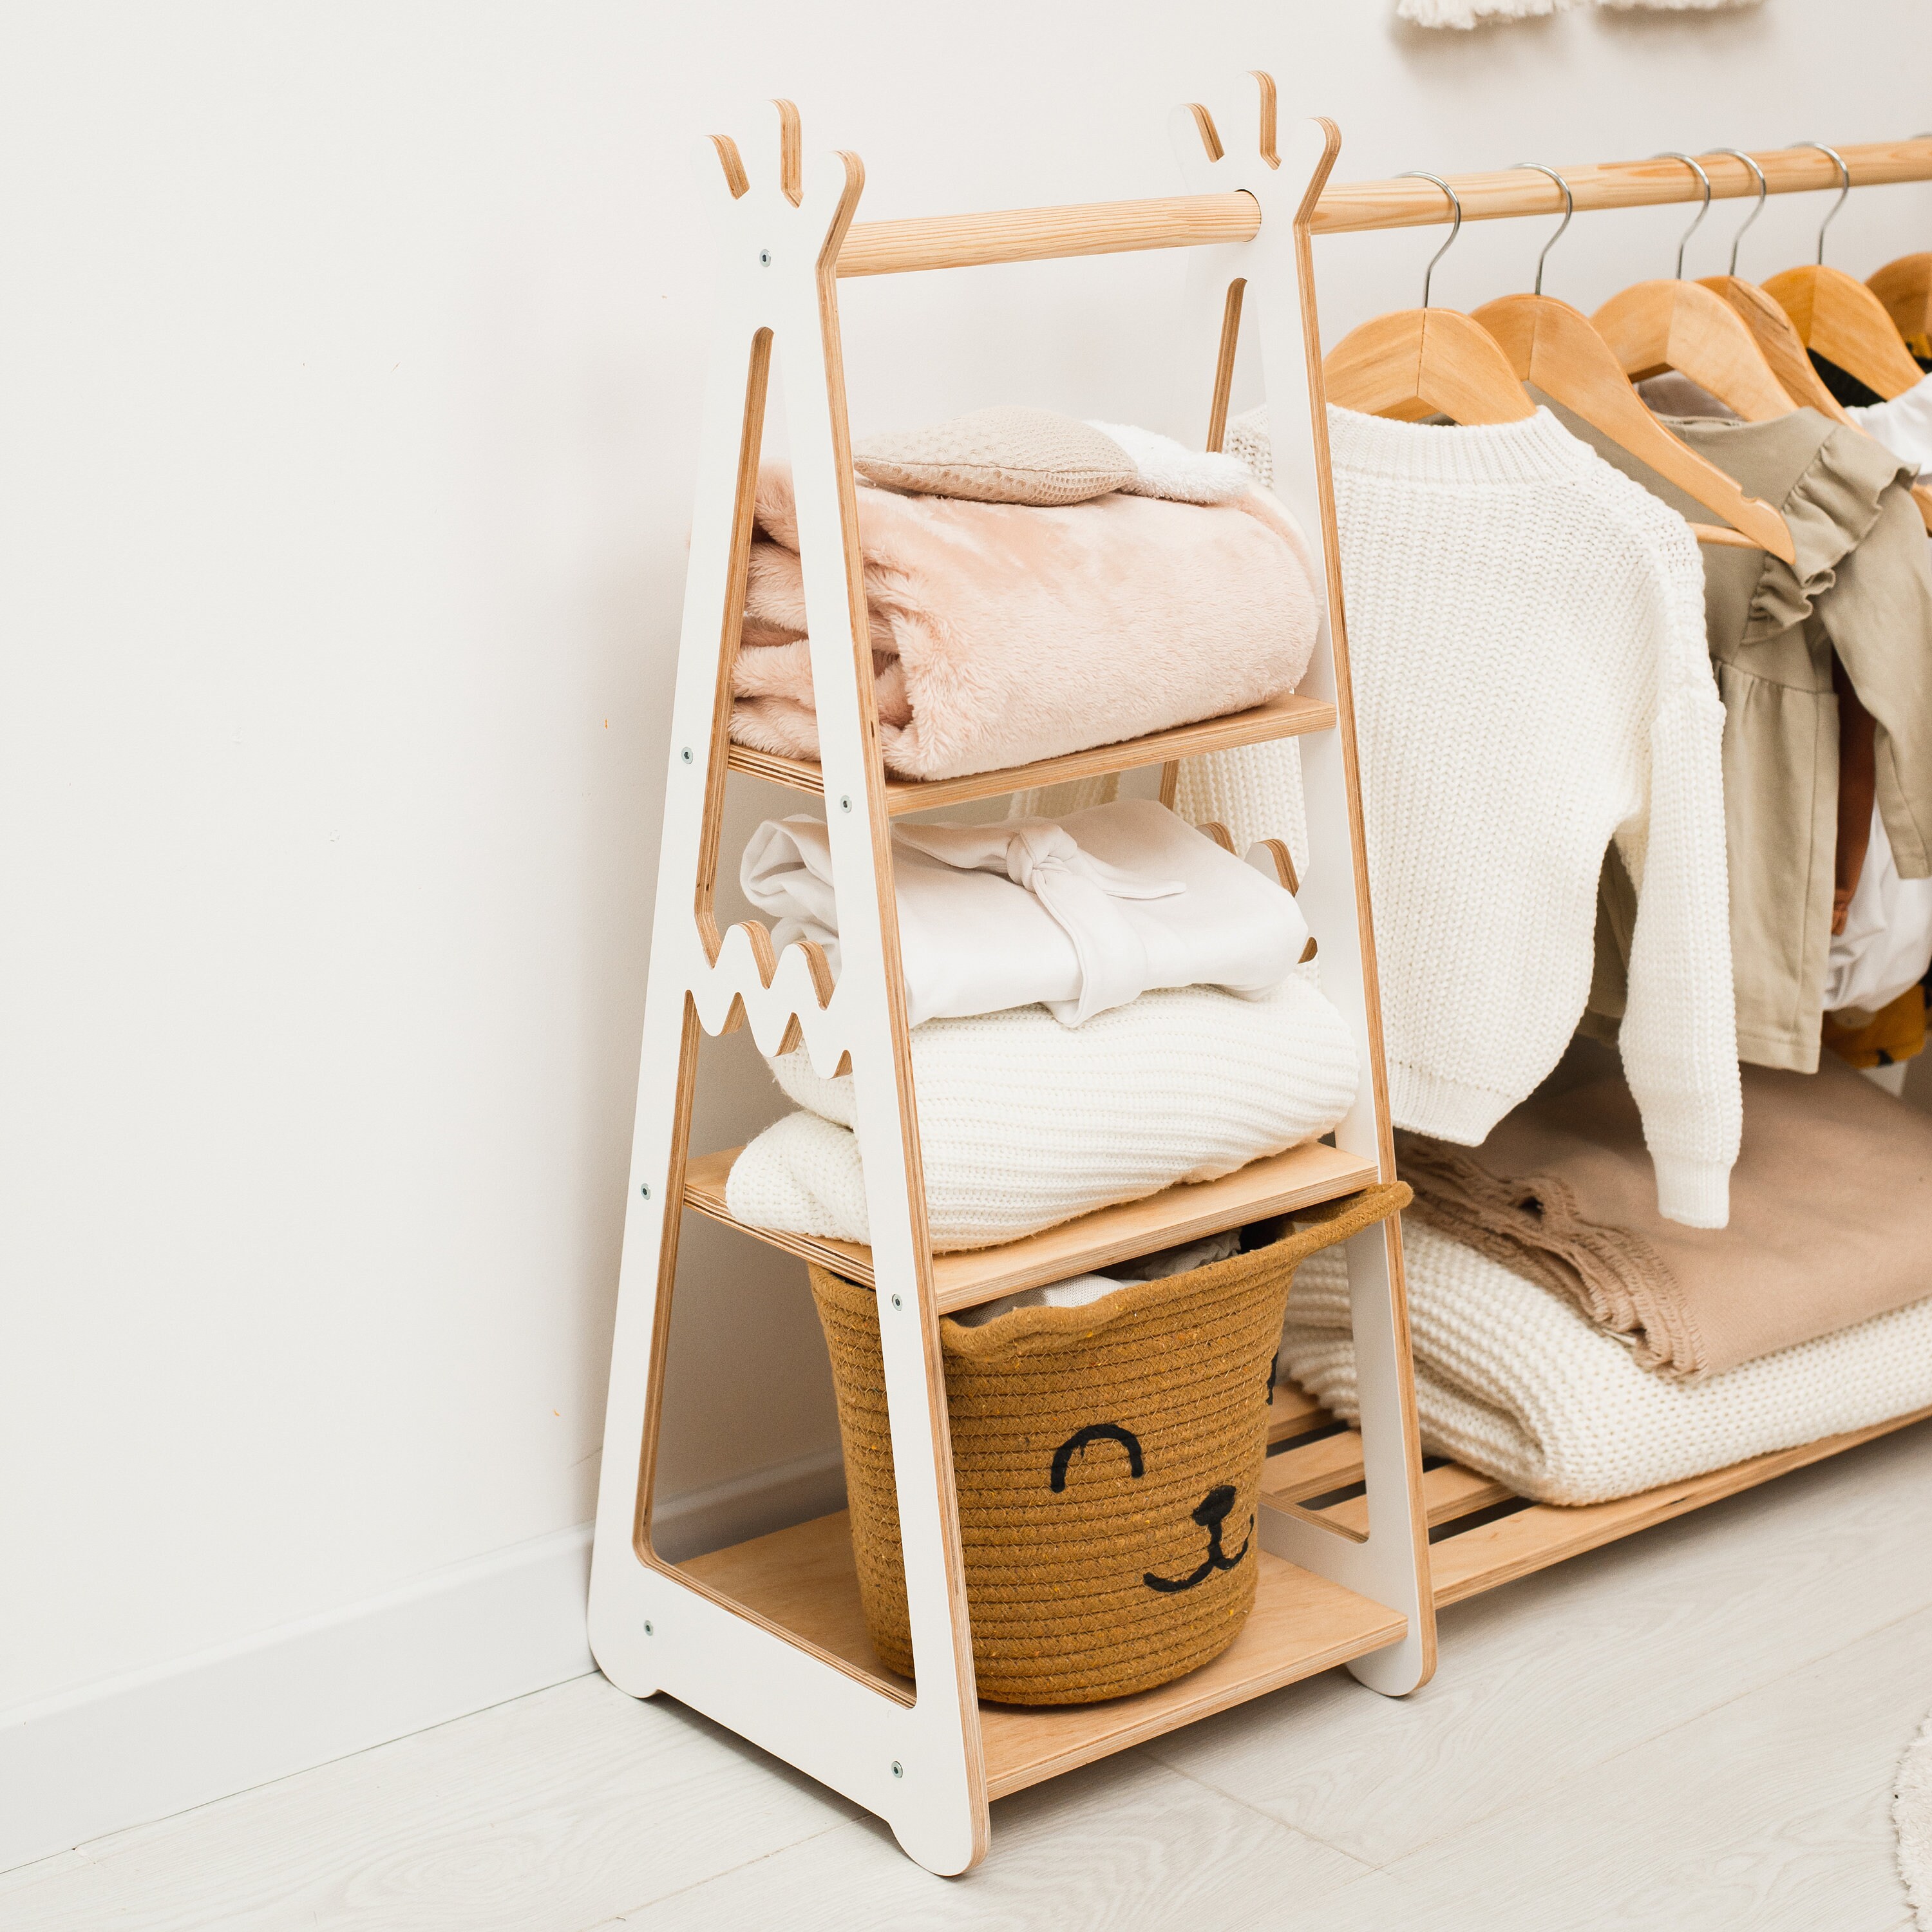 Clothing rack, Montessori dress up station – Sweet HOME from wood